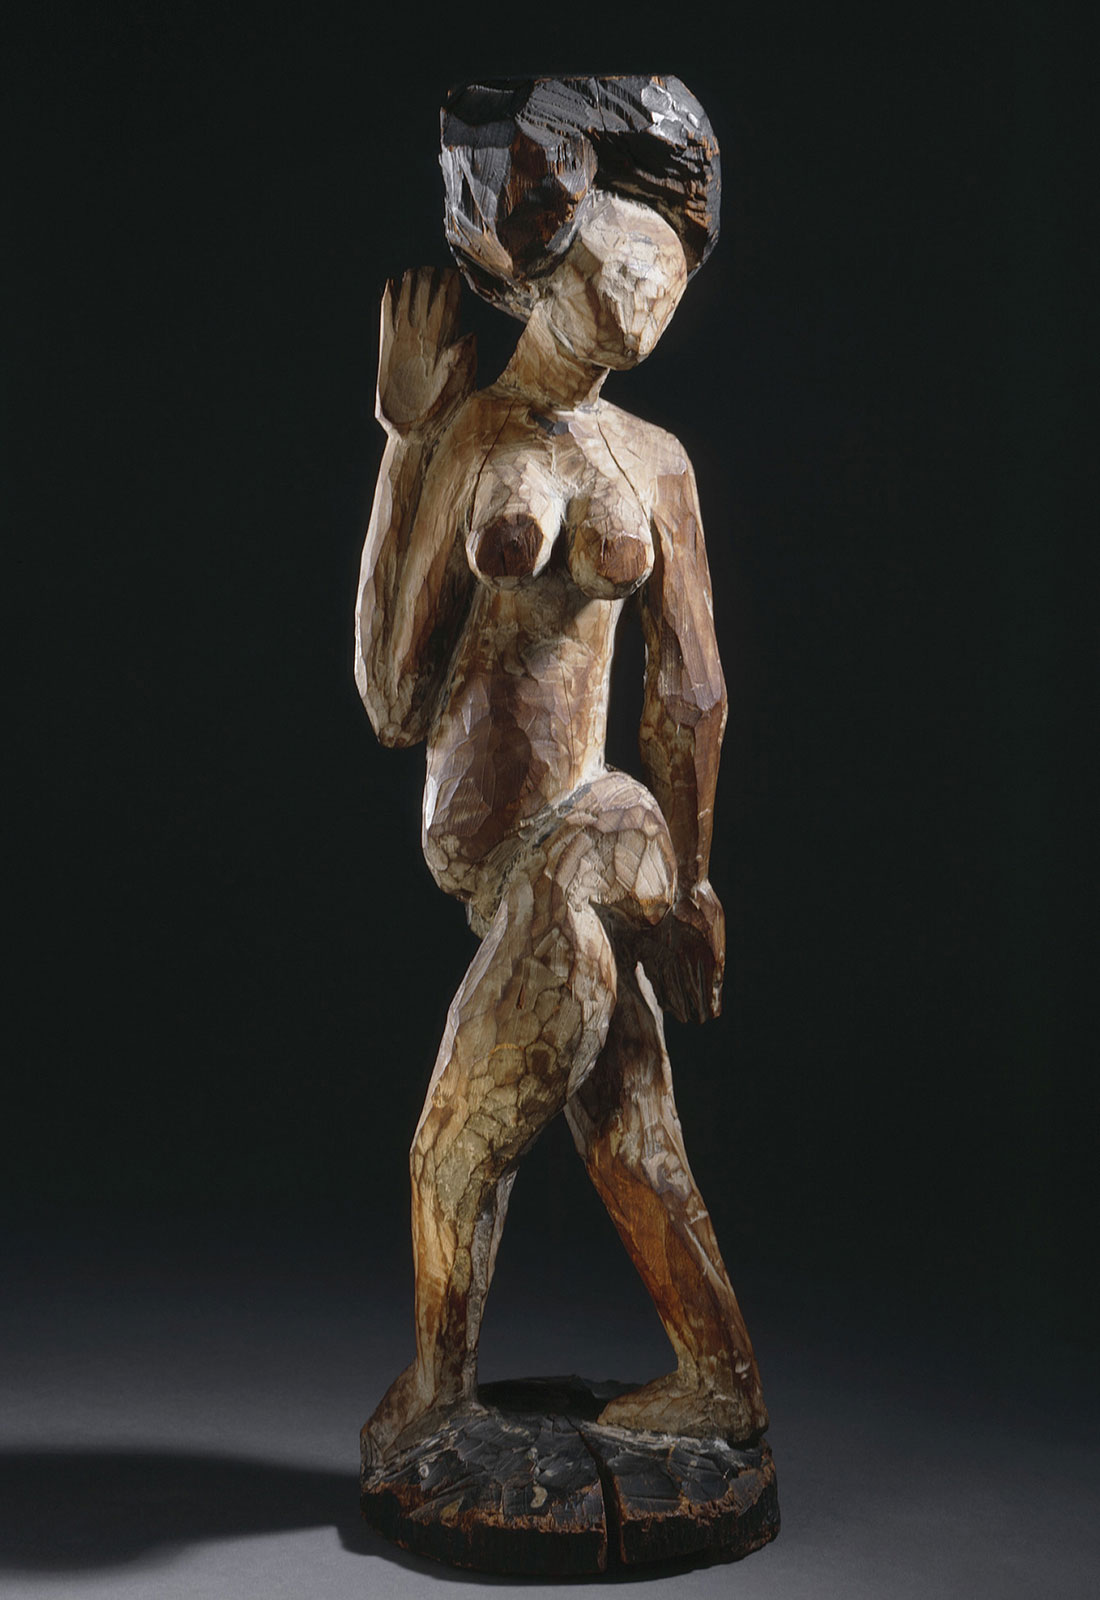 Dancer With Necklace, German Expressionist sculpture of a female that's abstracted in a cubist fashion